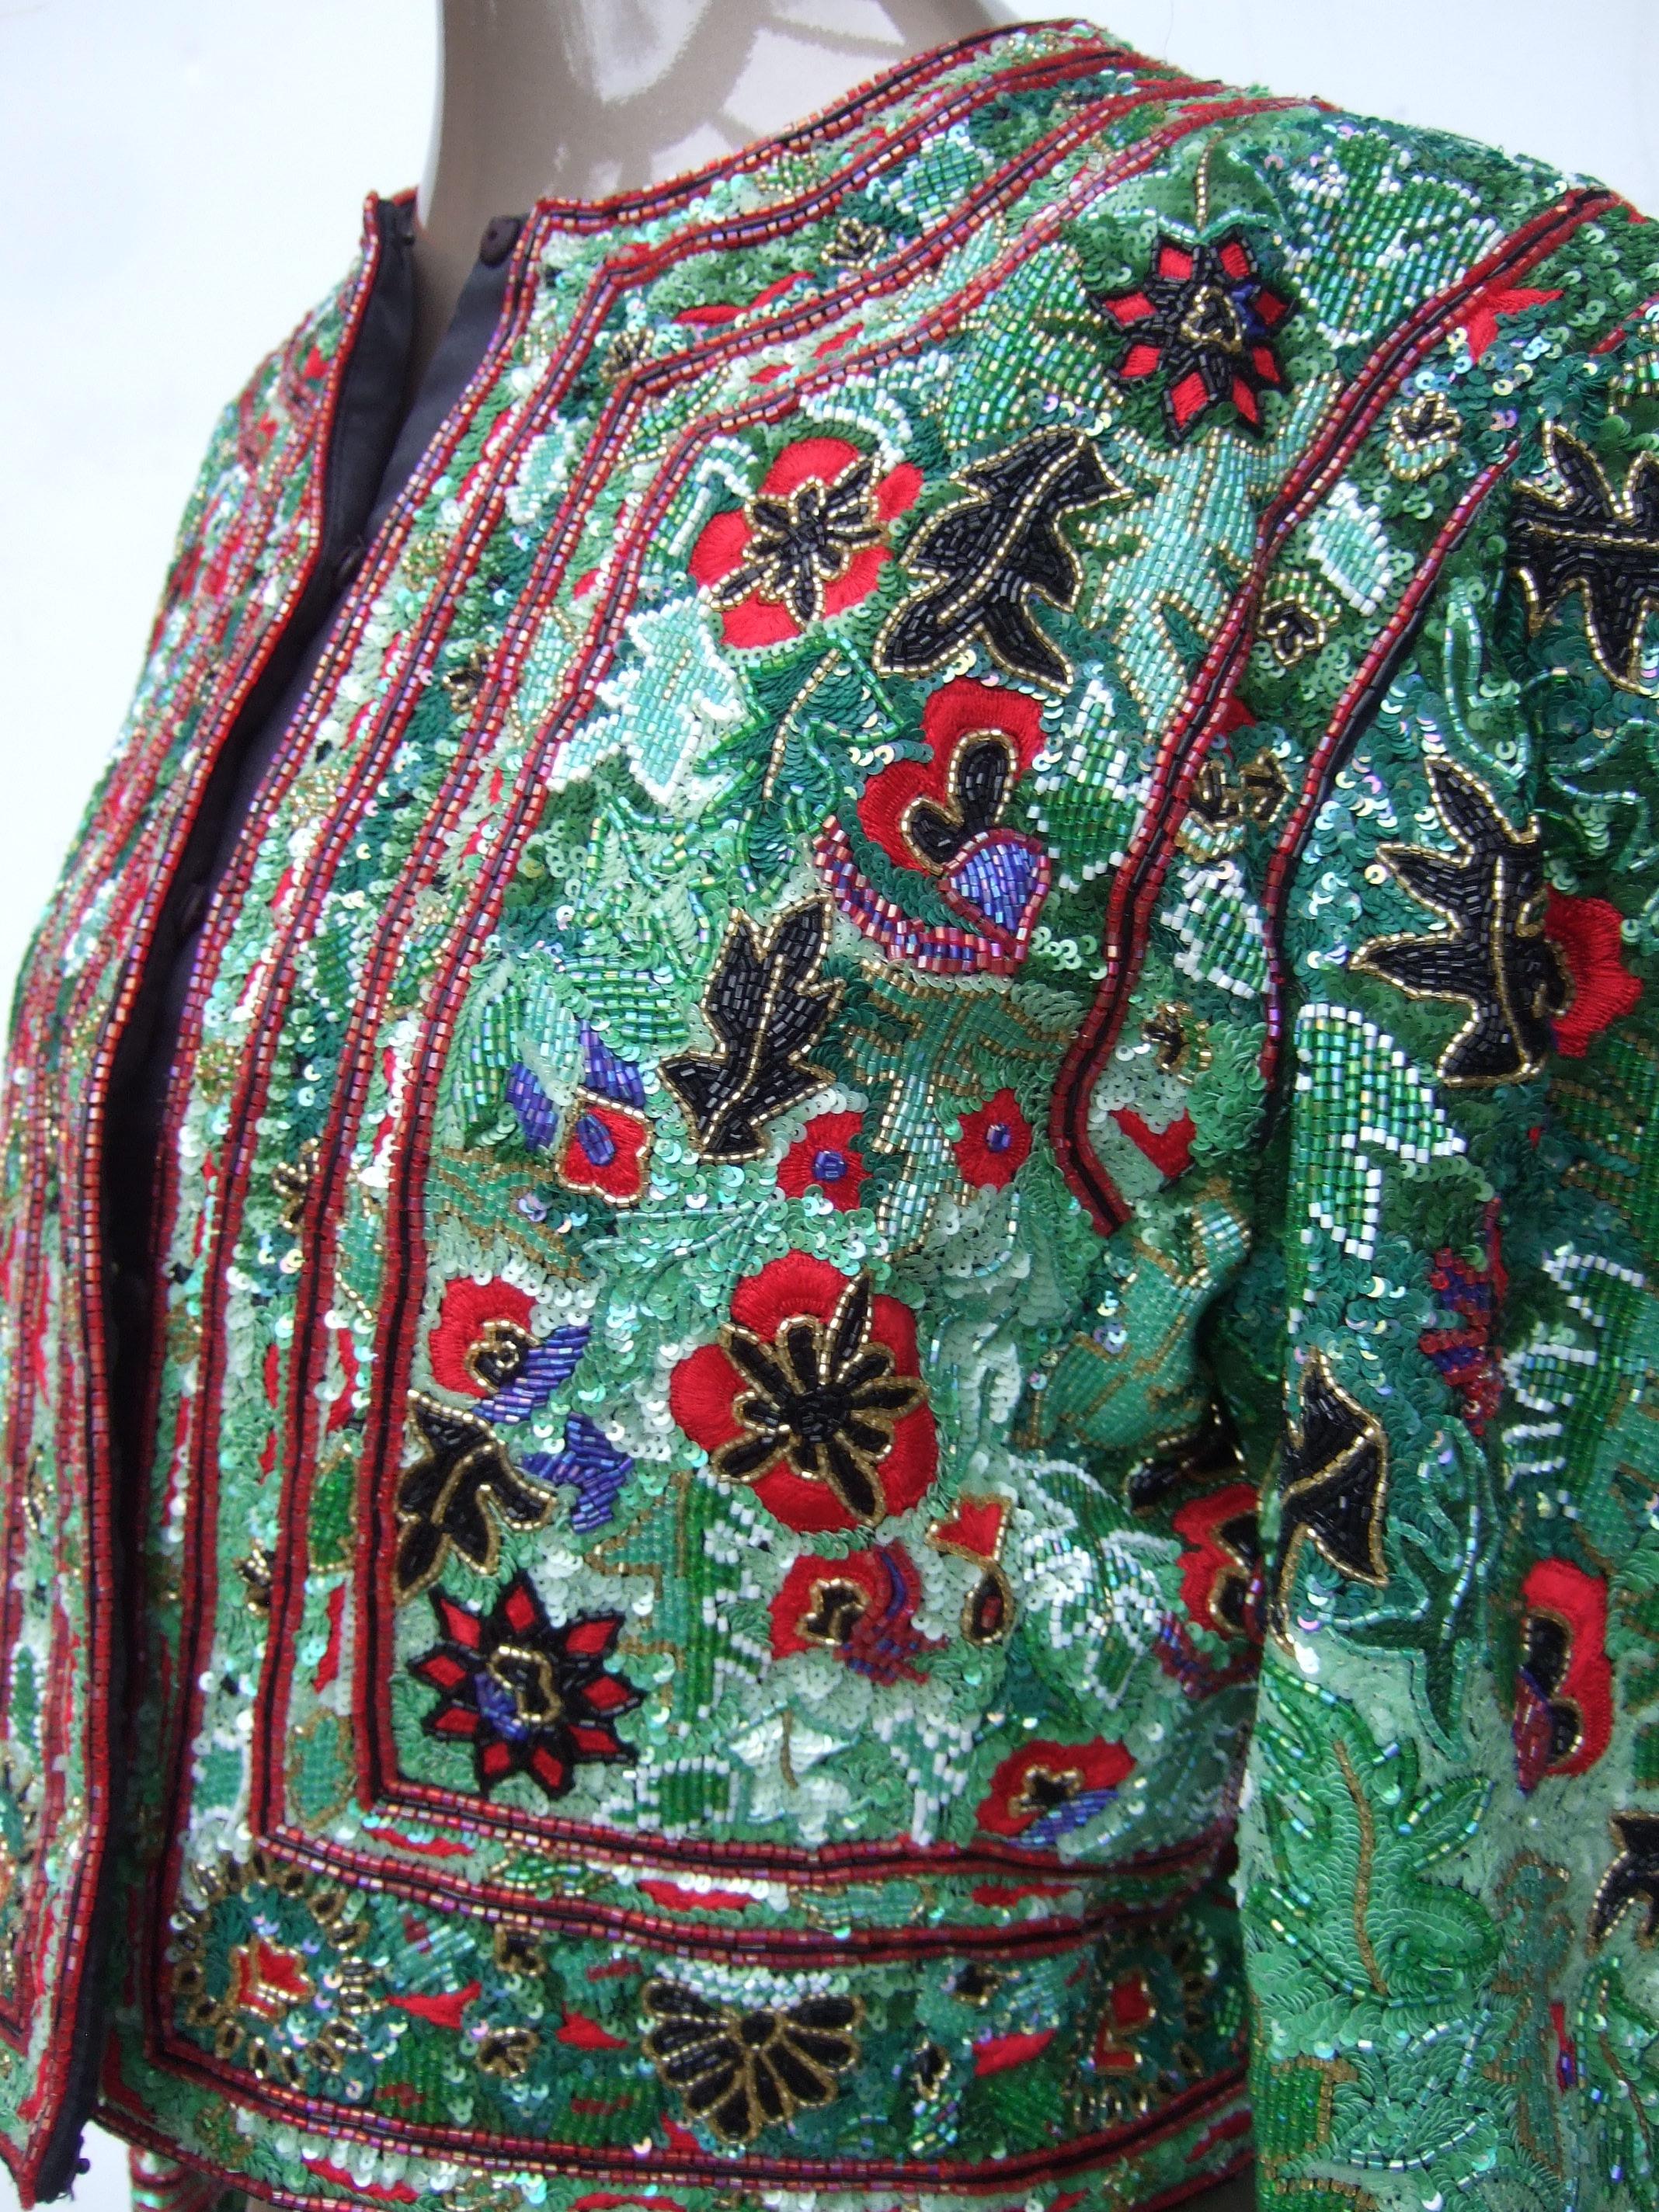 Exquisite Elaborate Glass Floral Beaded Embroidered Bolero Jacket c 1980s For Sale 10